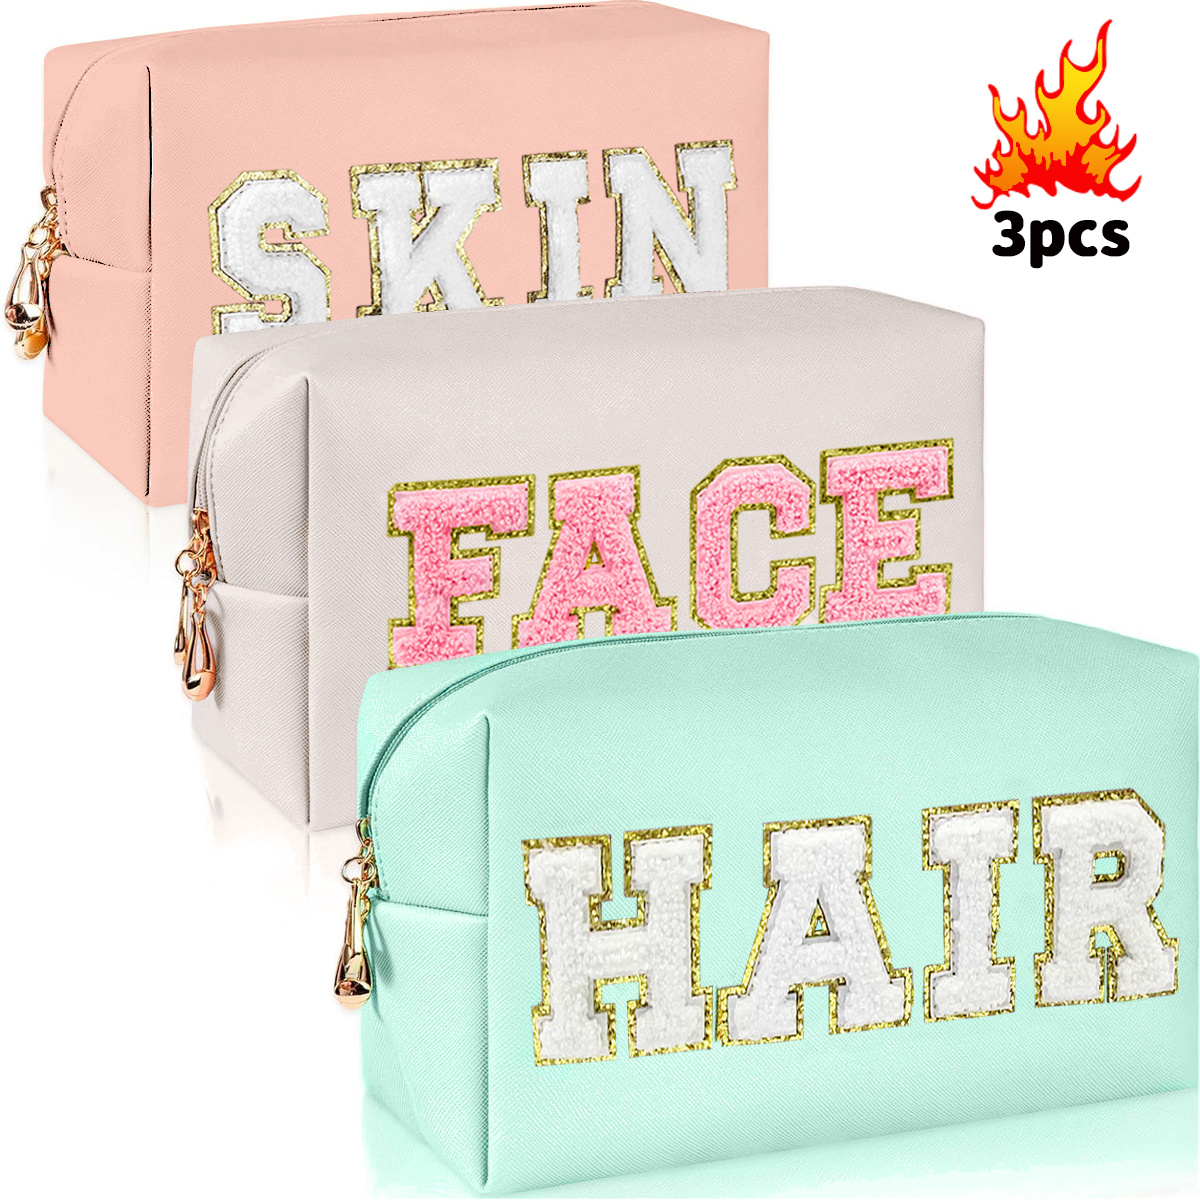 

3pcs Chenille Preppy Makeup Bag For Women Travel Toiletry Bag Chenille Letter Cosmetic Bag Pu Leather Waterproof Pouch Cute Zipper Organizer, Skin, Hair And Face